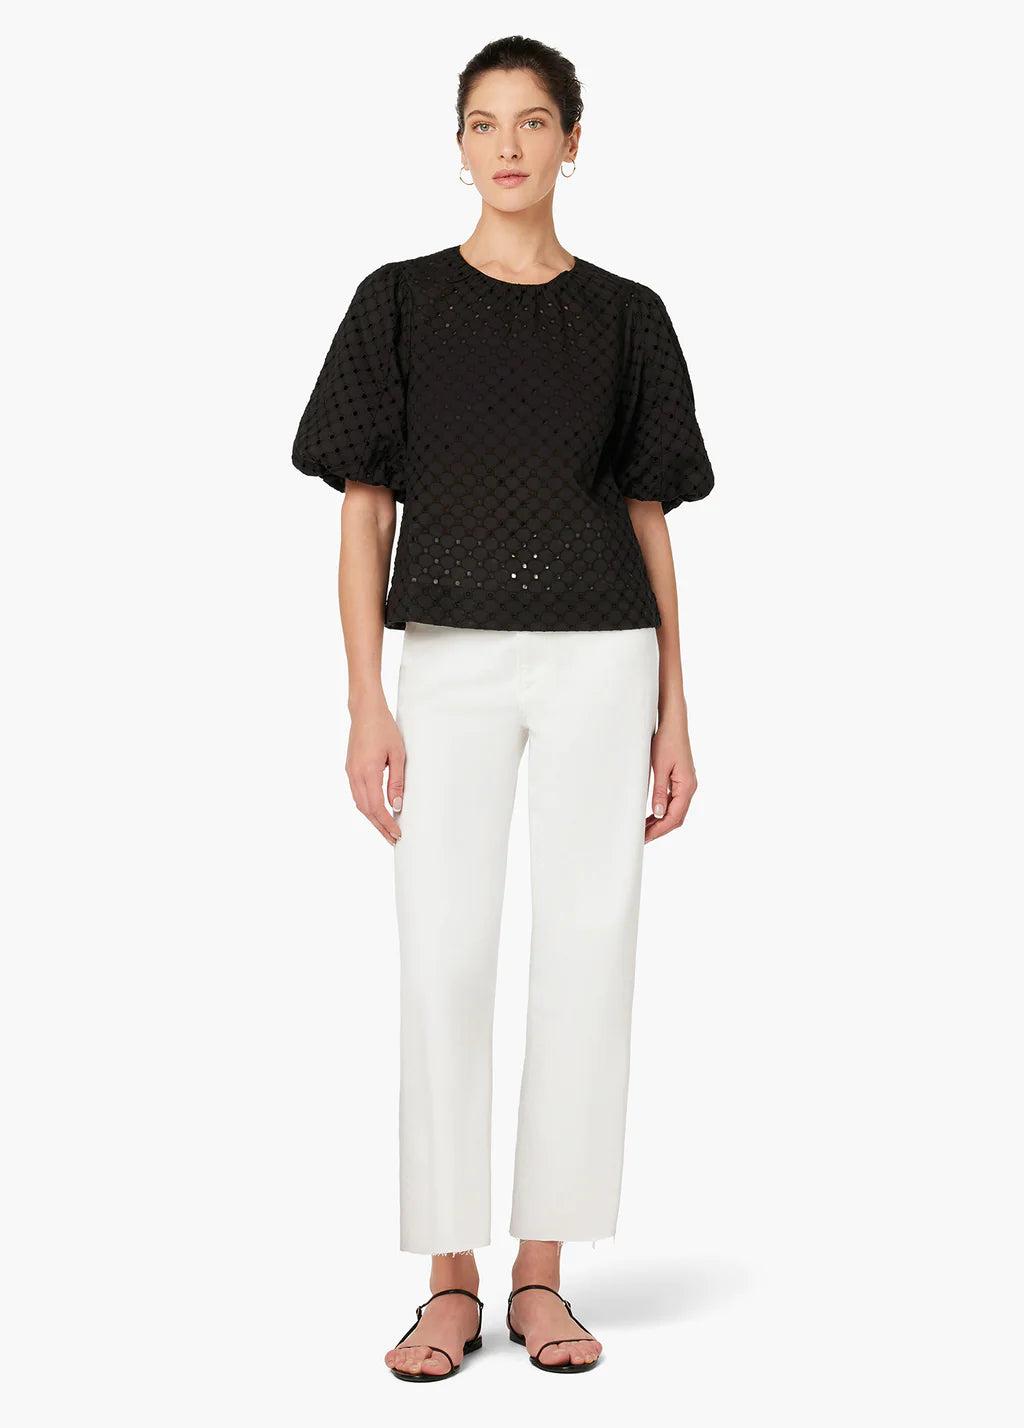 THE LORRAINE BRODERIE TOP